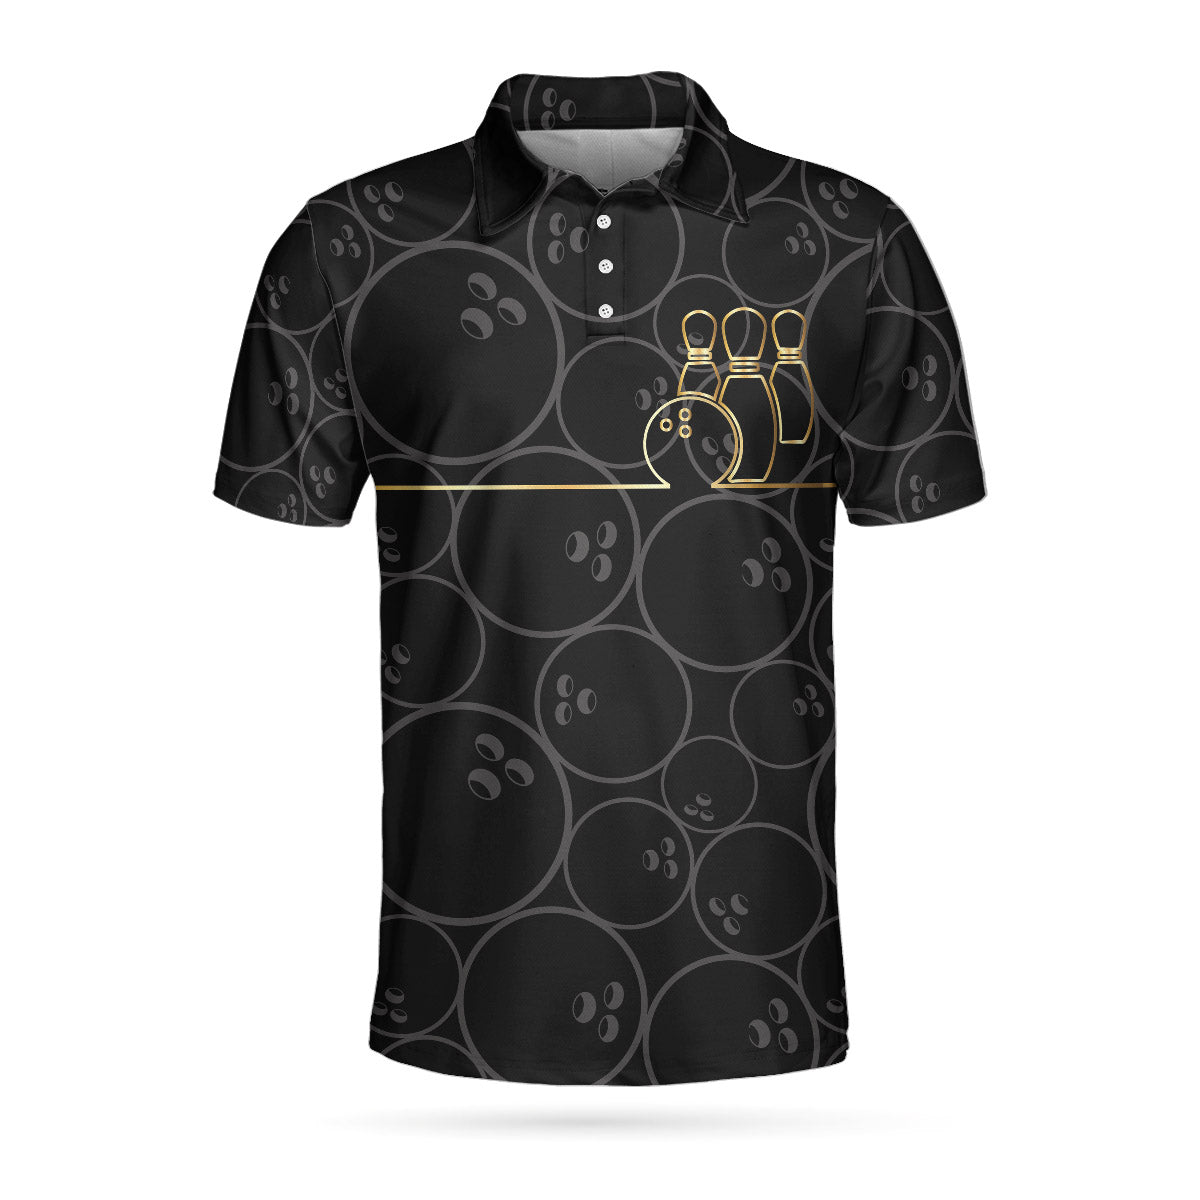 Bowling Pattern And Golden Polo Shirt/ Bowling Ball Background Polo Shirt/ Best Bowling Shirt For Men Coolspod